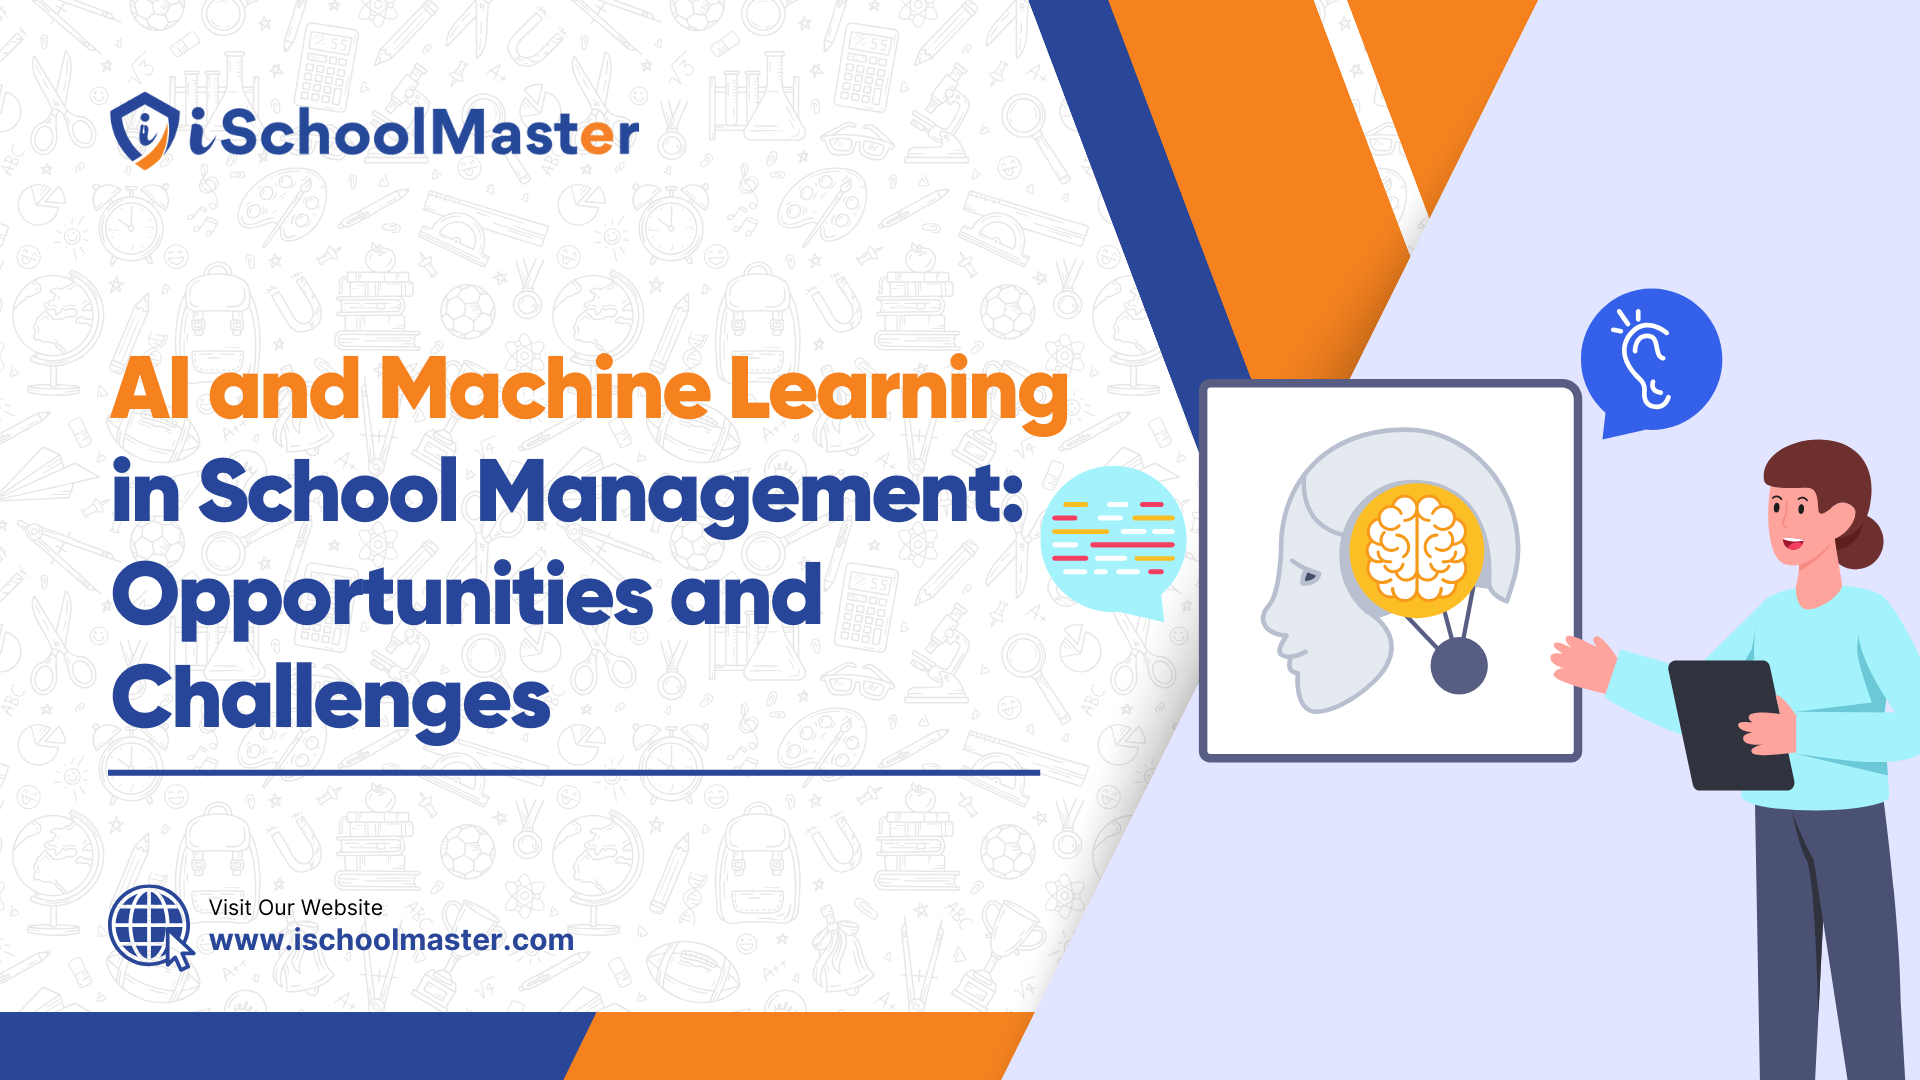 AI and Machine Learning in School Management: Opportunities and Challenges